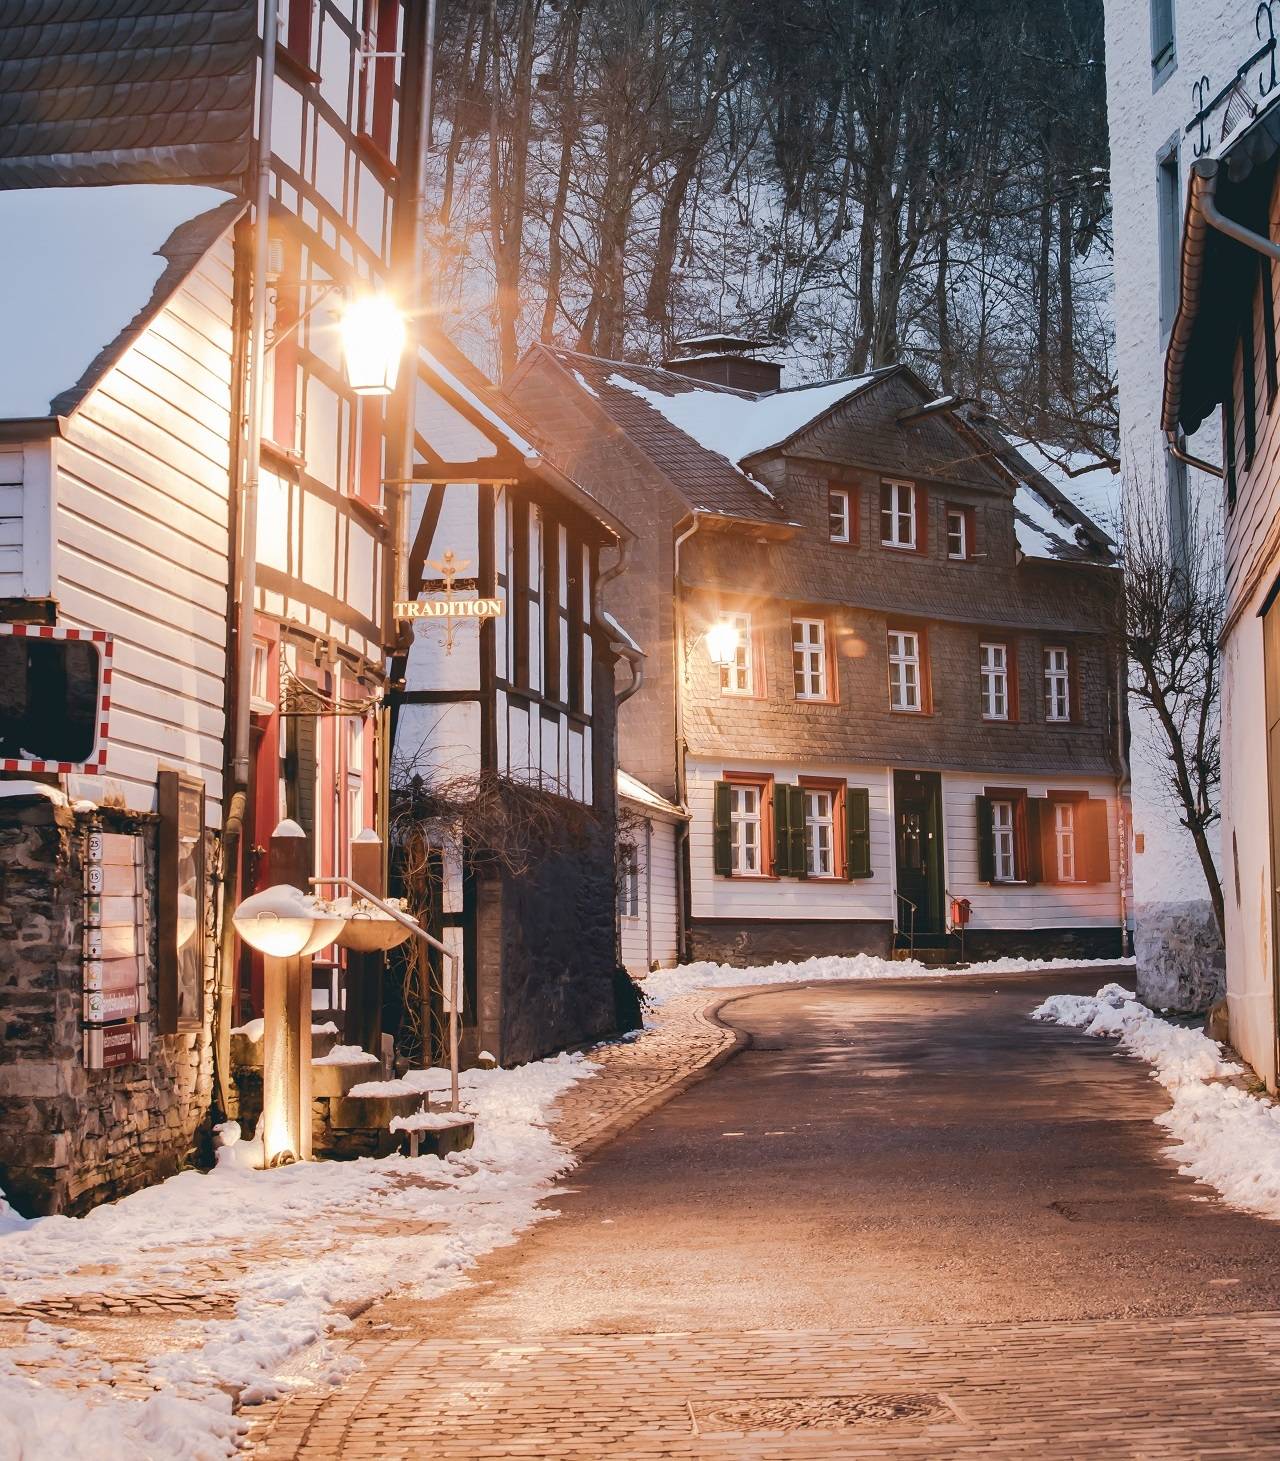 Winter road trip to Germany! The village of Monchau!